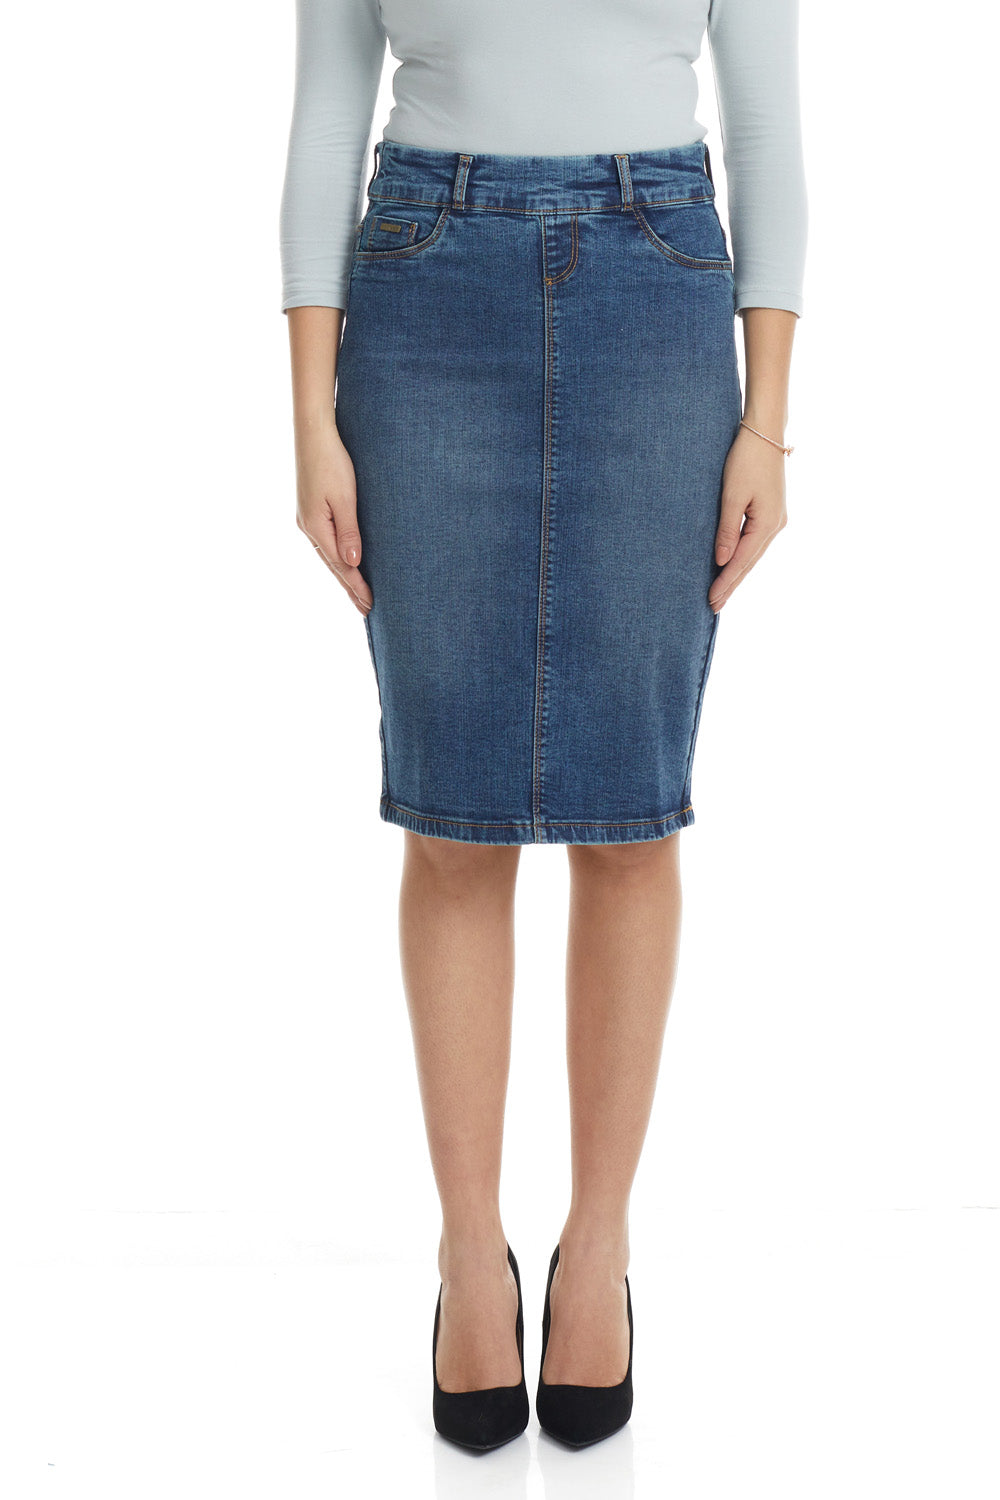 blue tight jean skirt with faux pockets